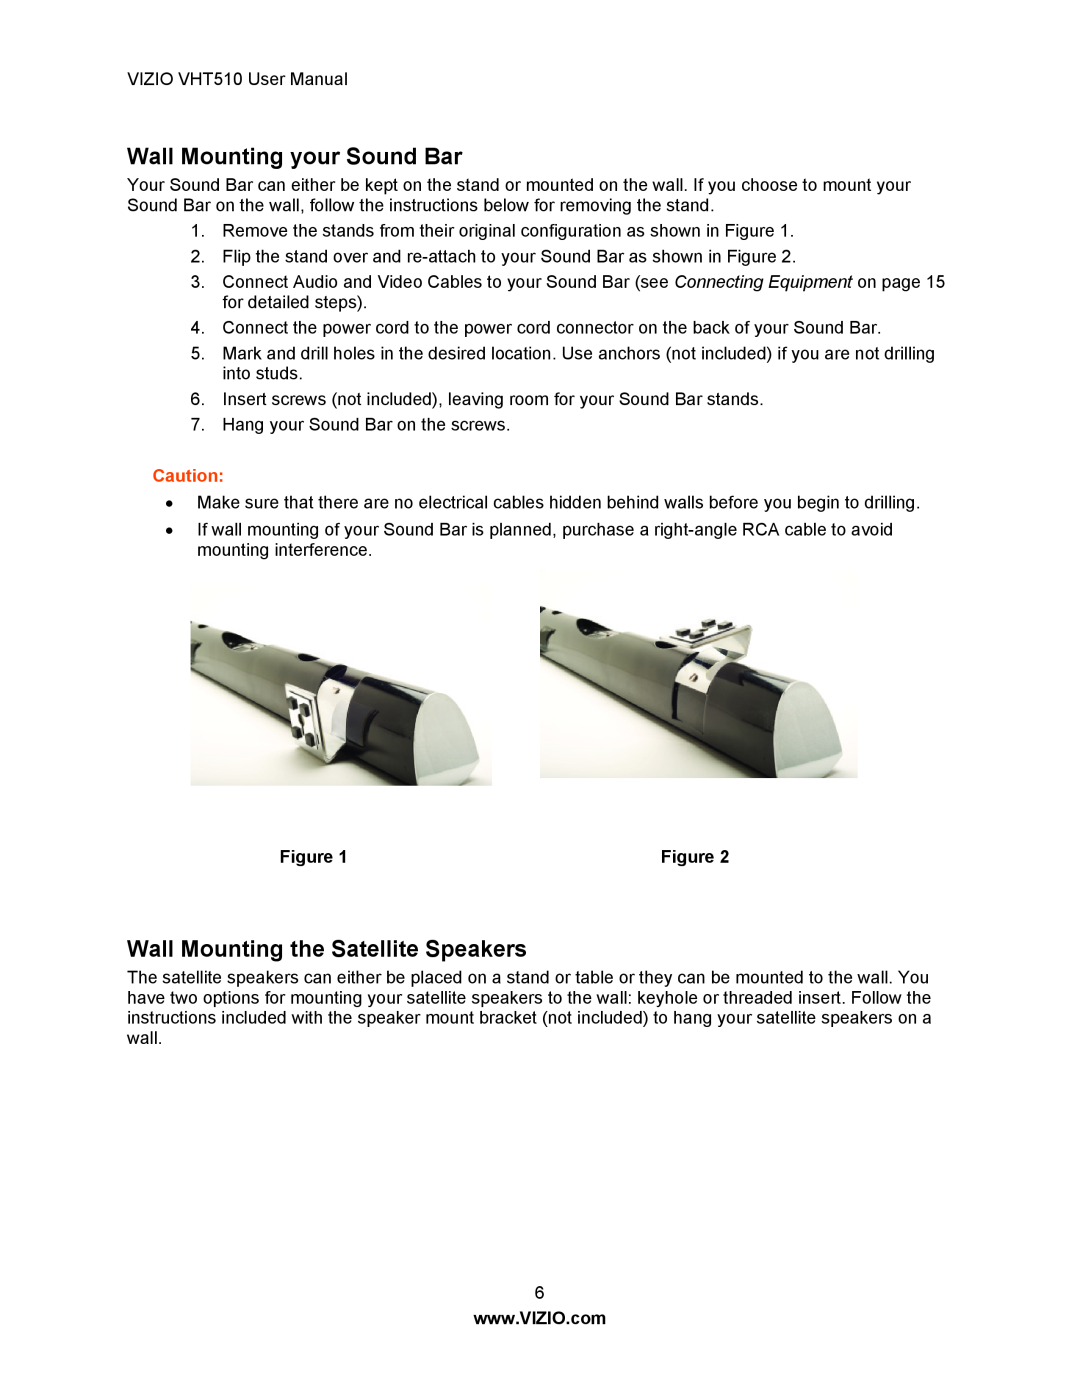 Vizio VHT510 user manual Wall Mounting your Sound Bar, Wall Mounting the Satellite Speakers 